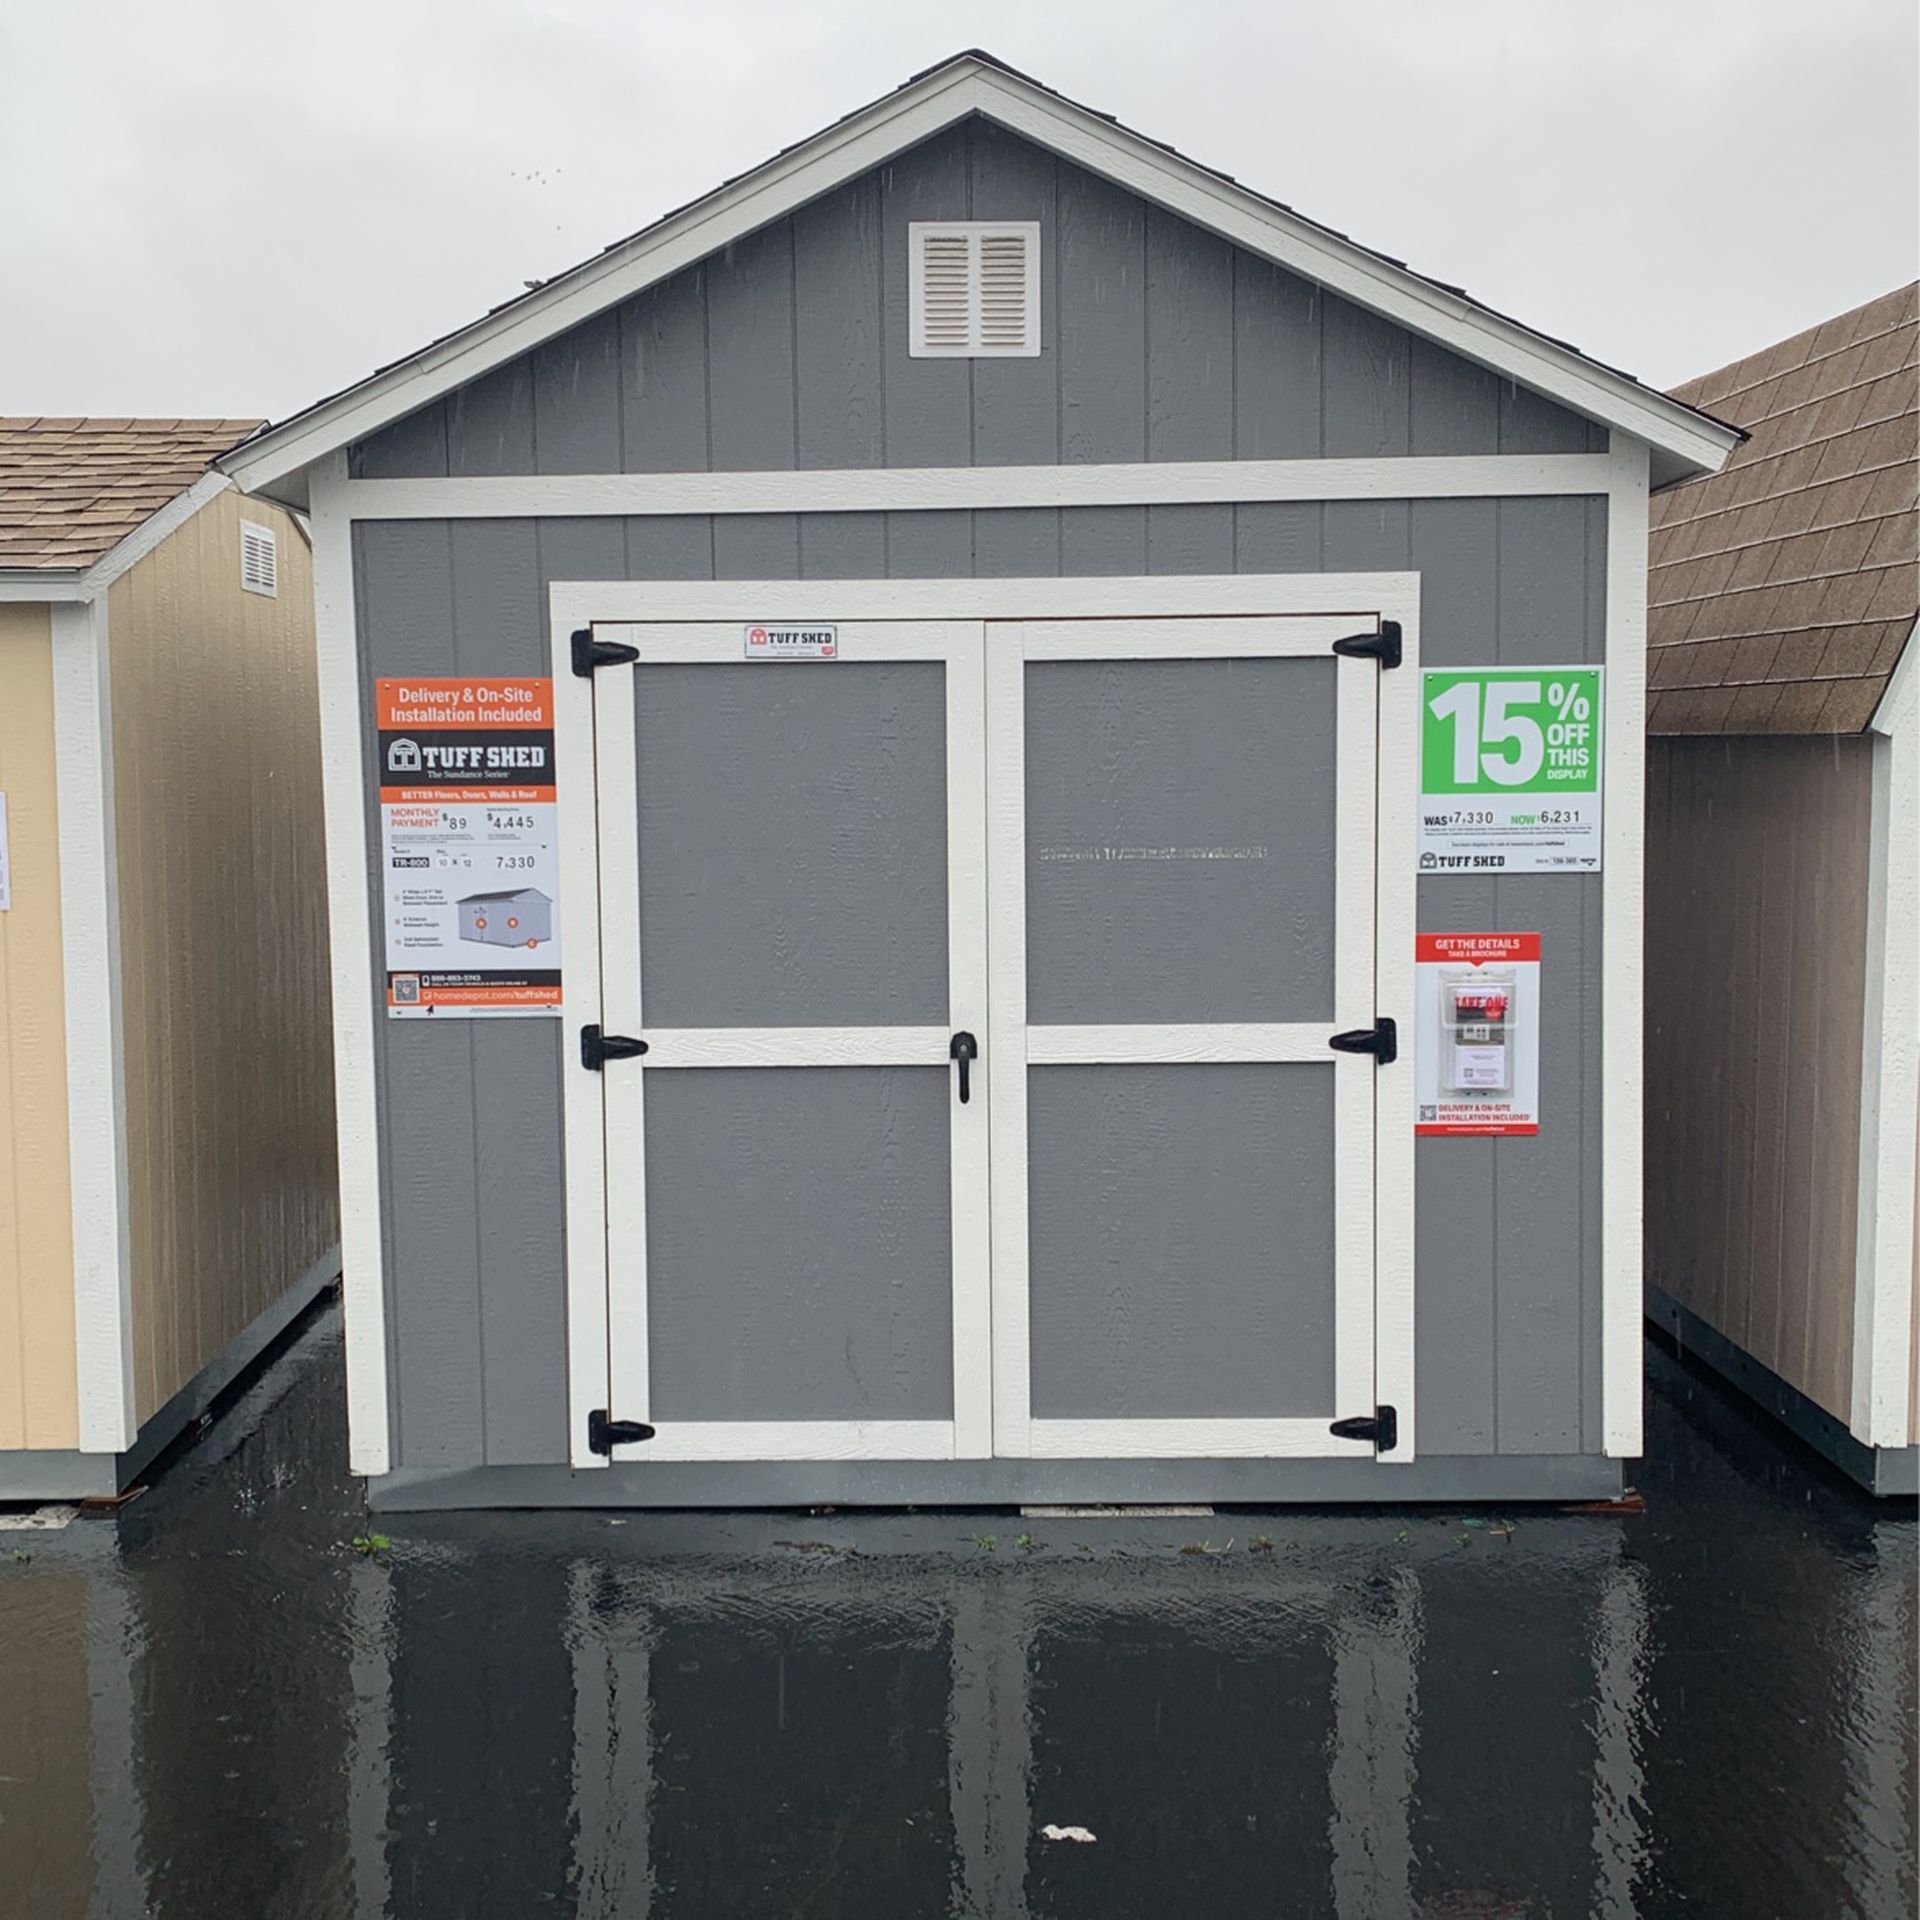 Tuff Shed Sundance TR-800 10x12 Was $7,330 Now $6,231 15% Off Financing Available!